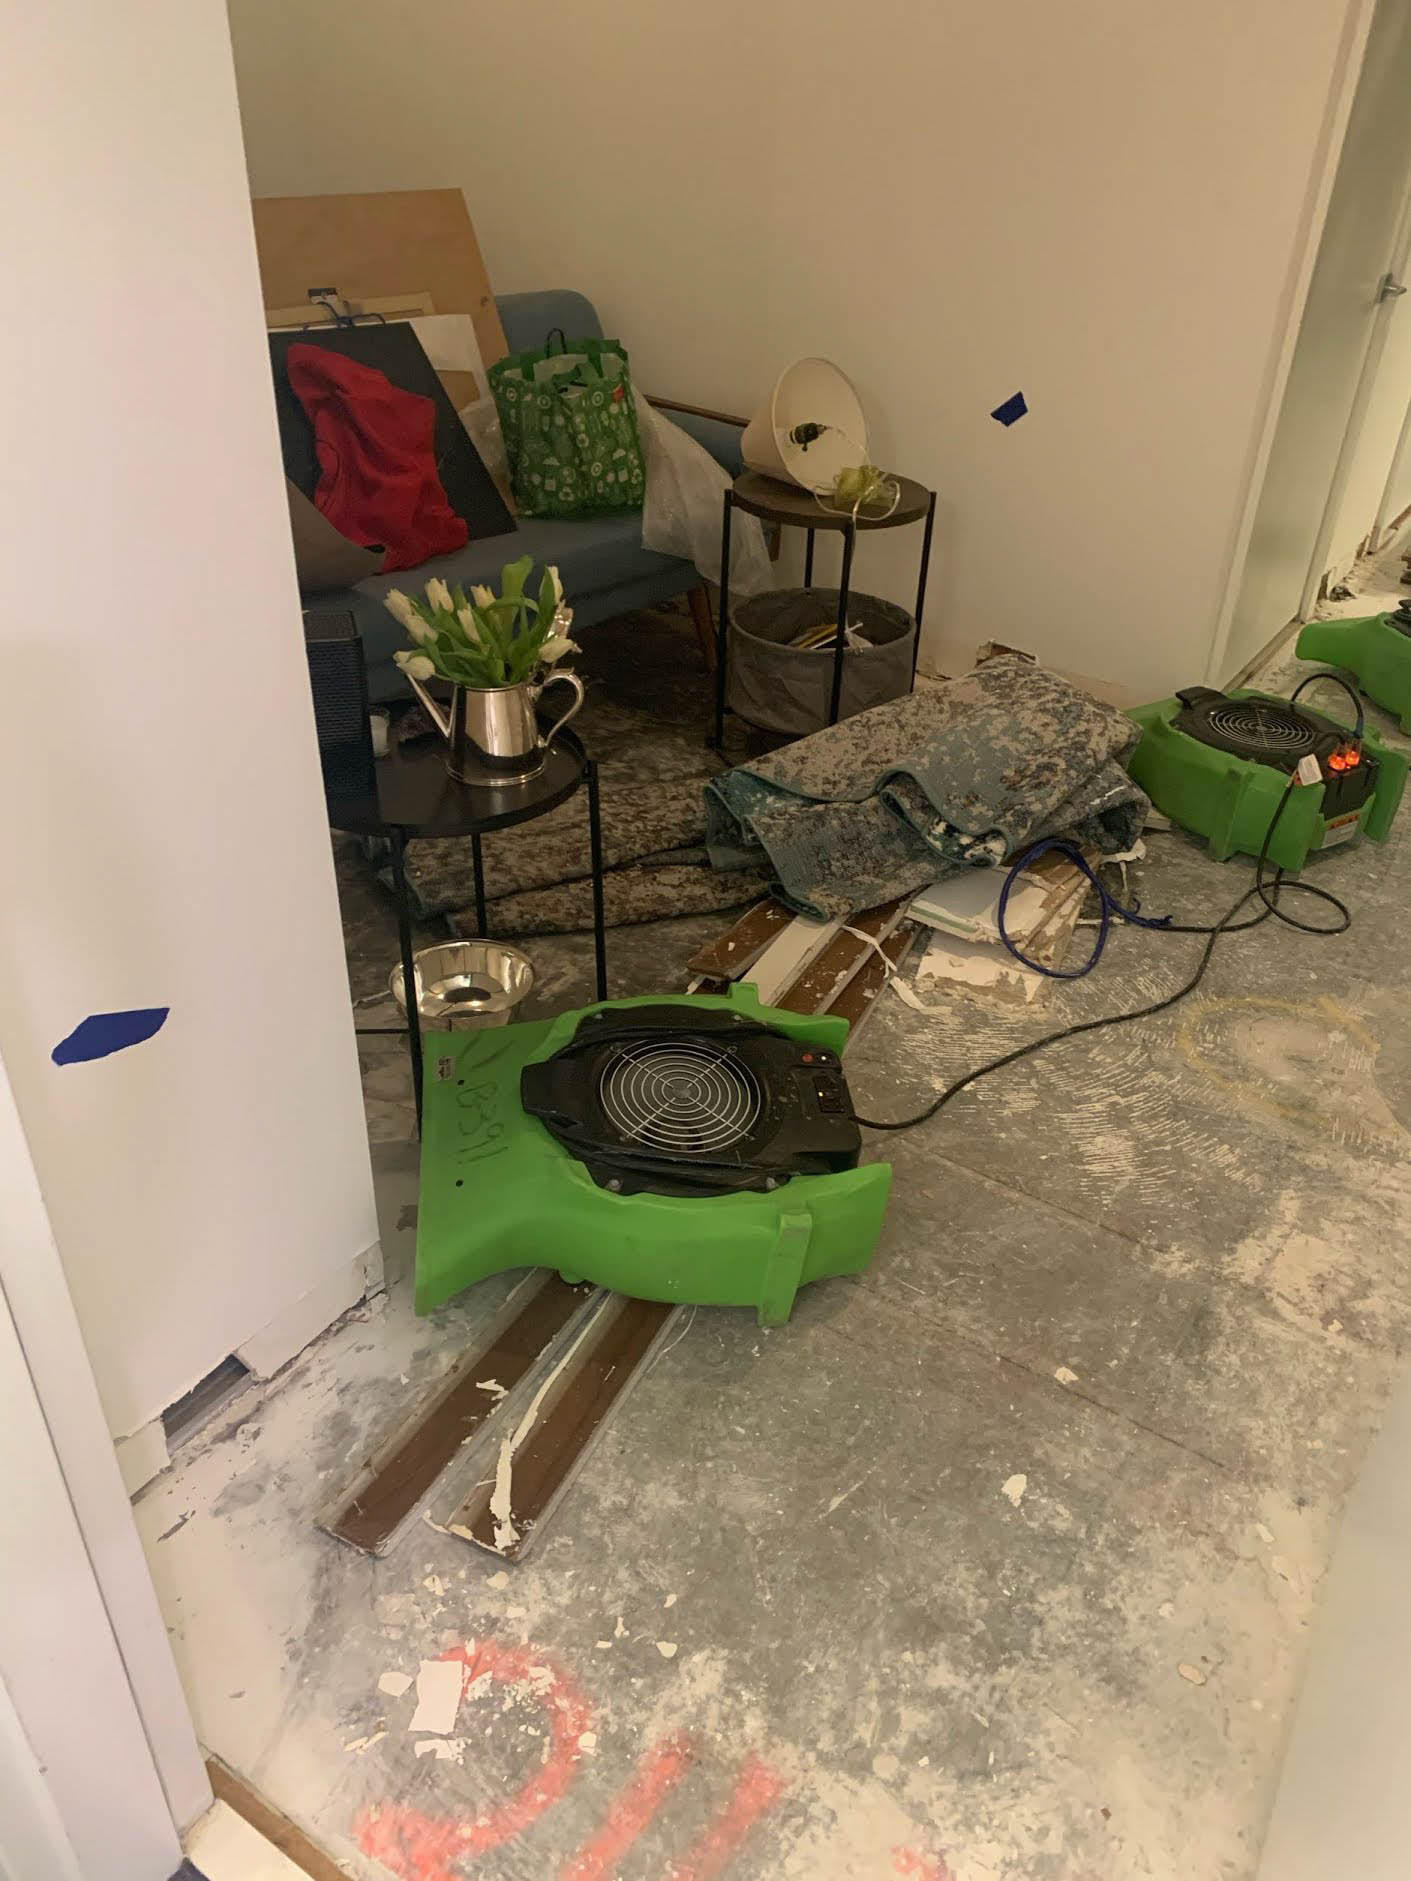 Water damage caused by flooding or water leaks? Call SERVPRO of Brickell